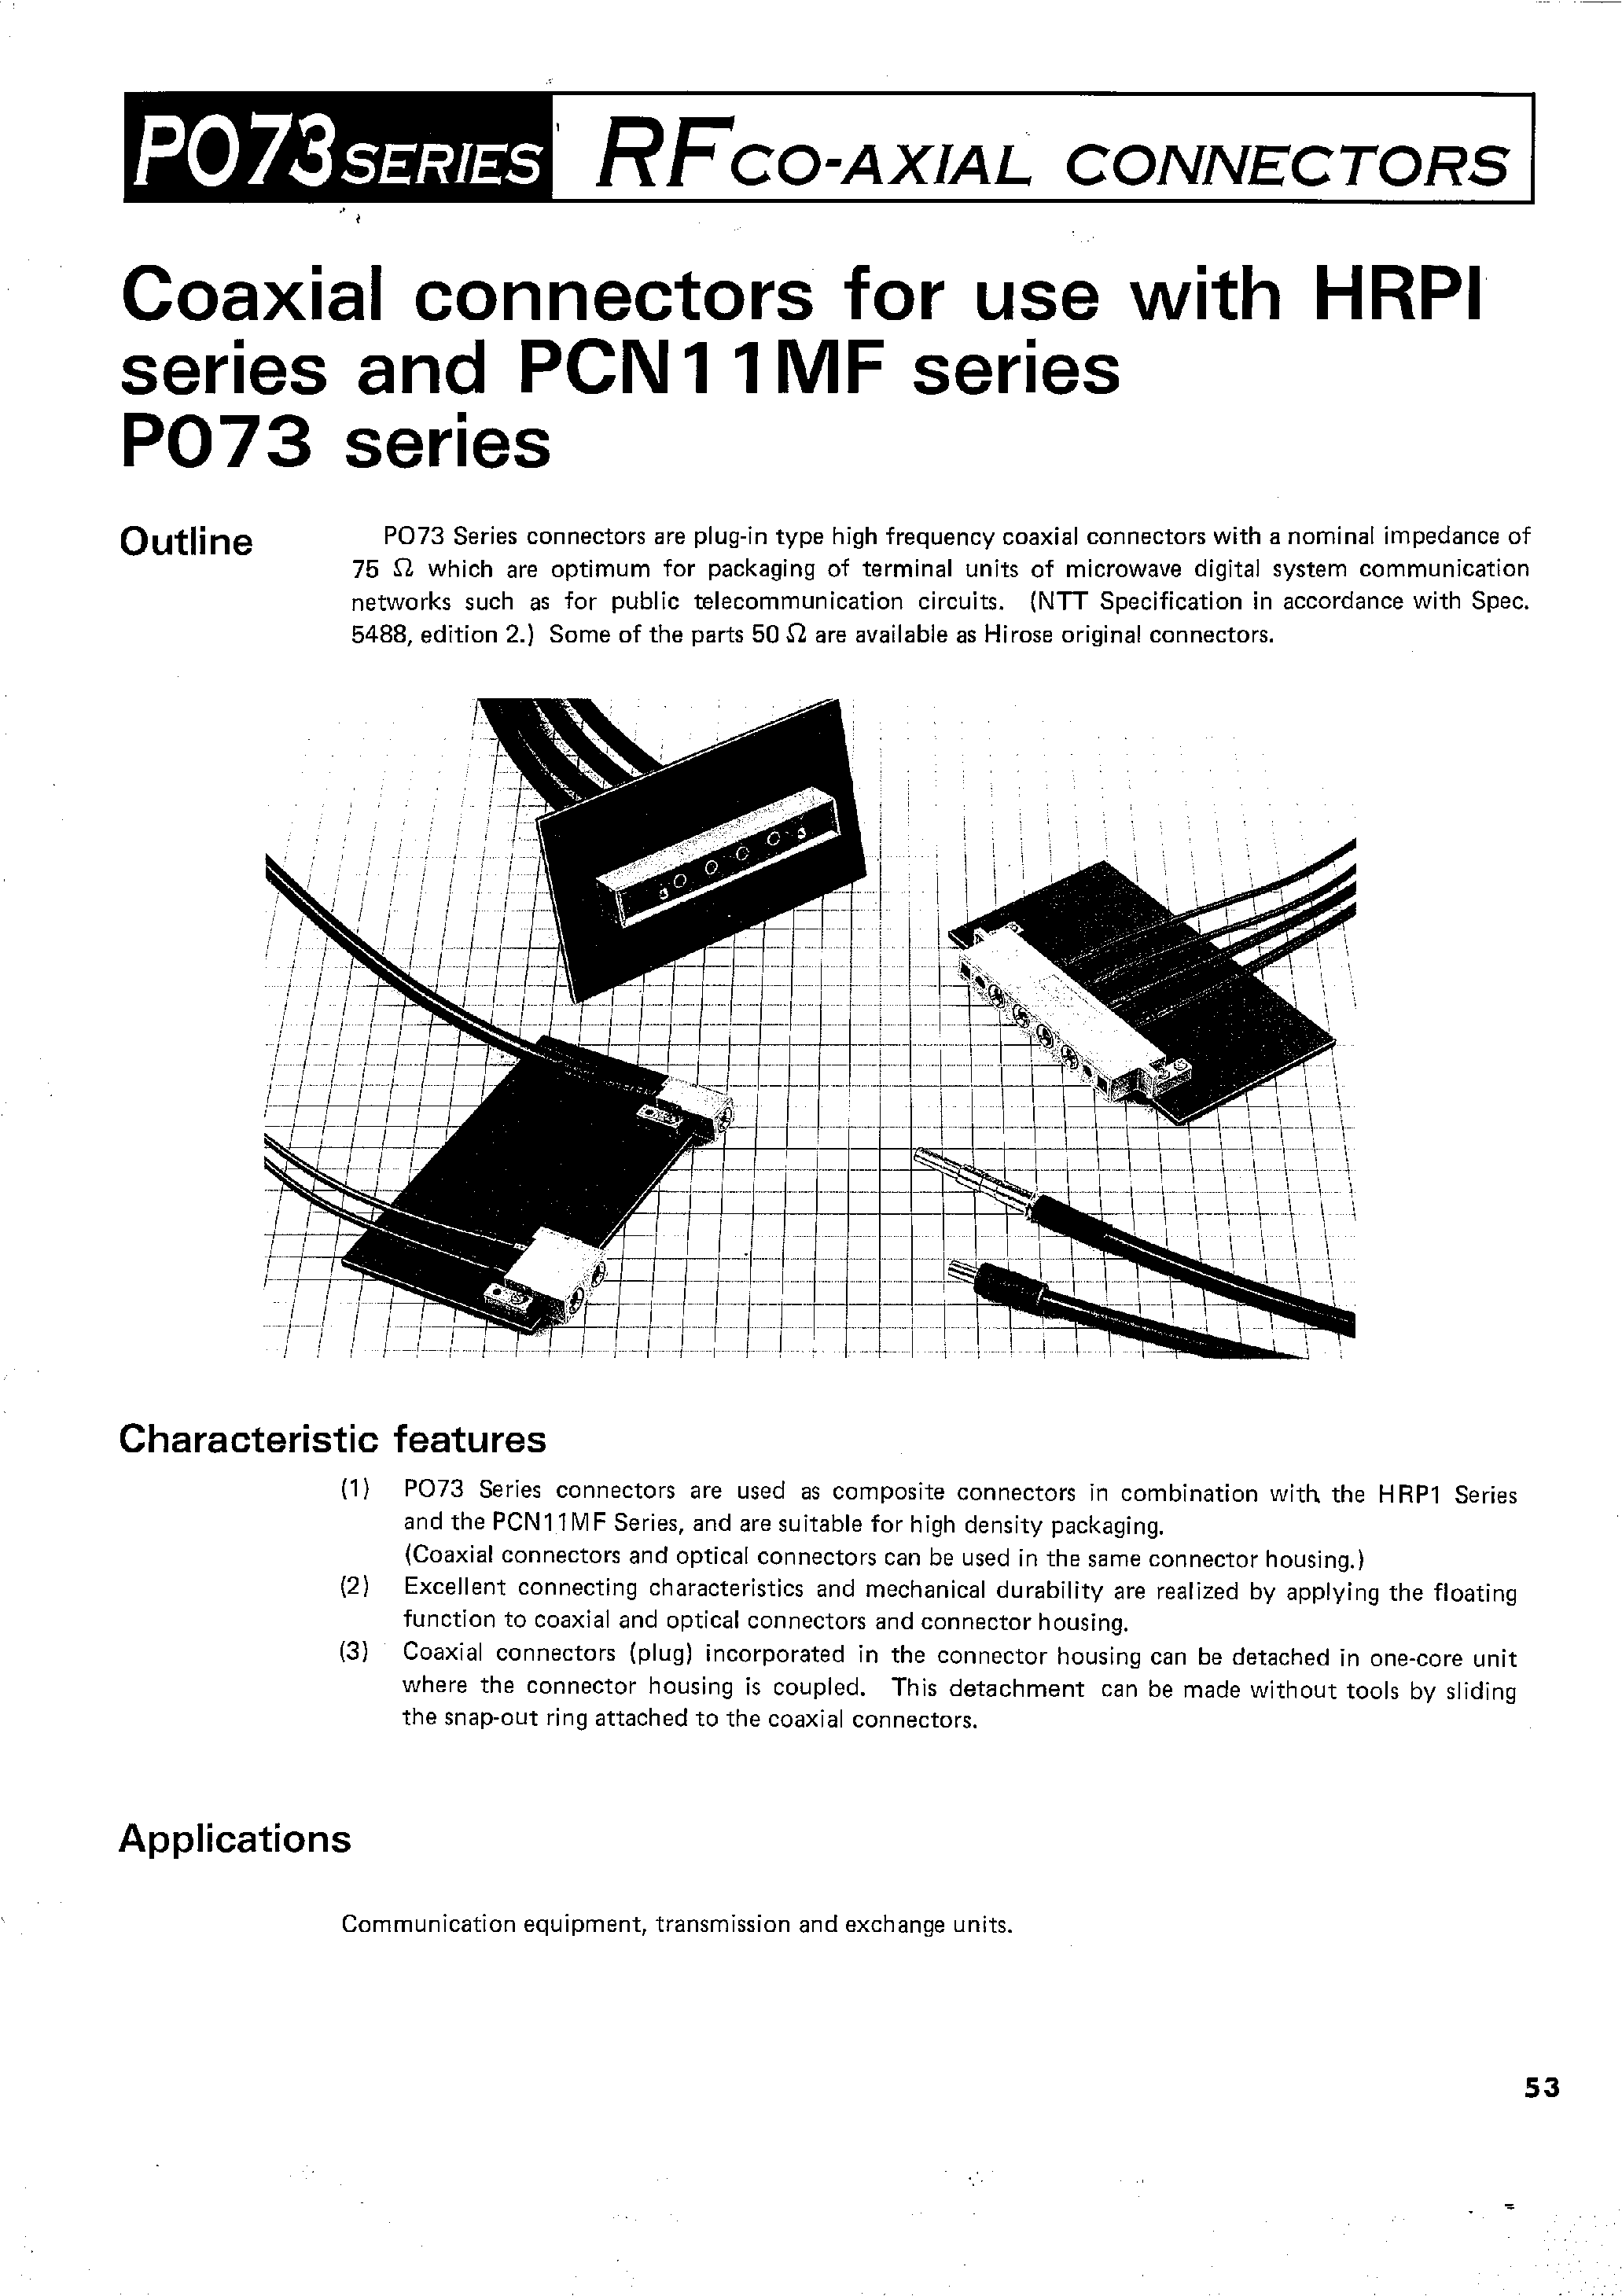 Datasheet PO73-P-3CW - RFCO-AXIAL CONNECTORS(COAXIAL CONNECTORS for use with HRPI) page 1